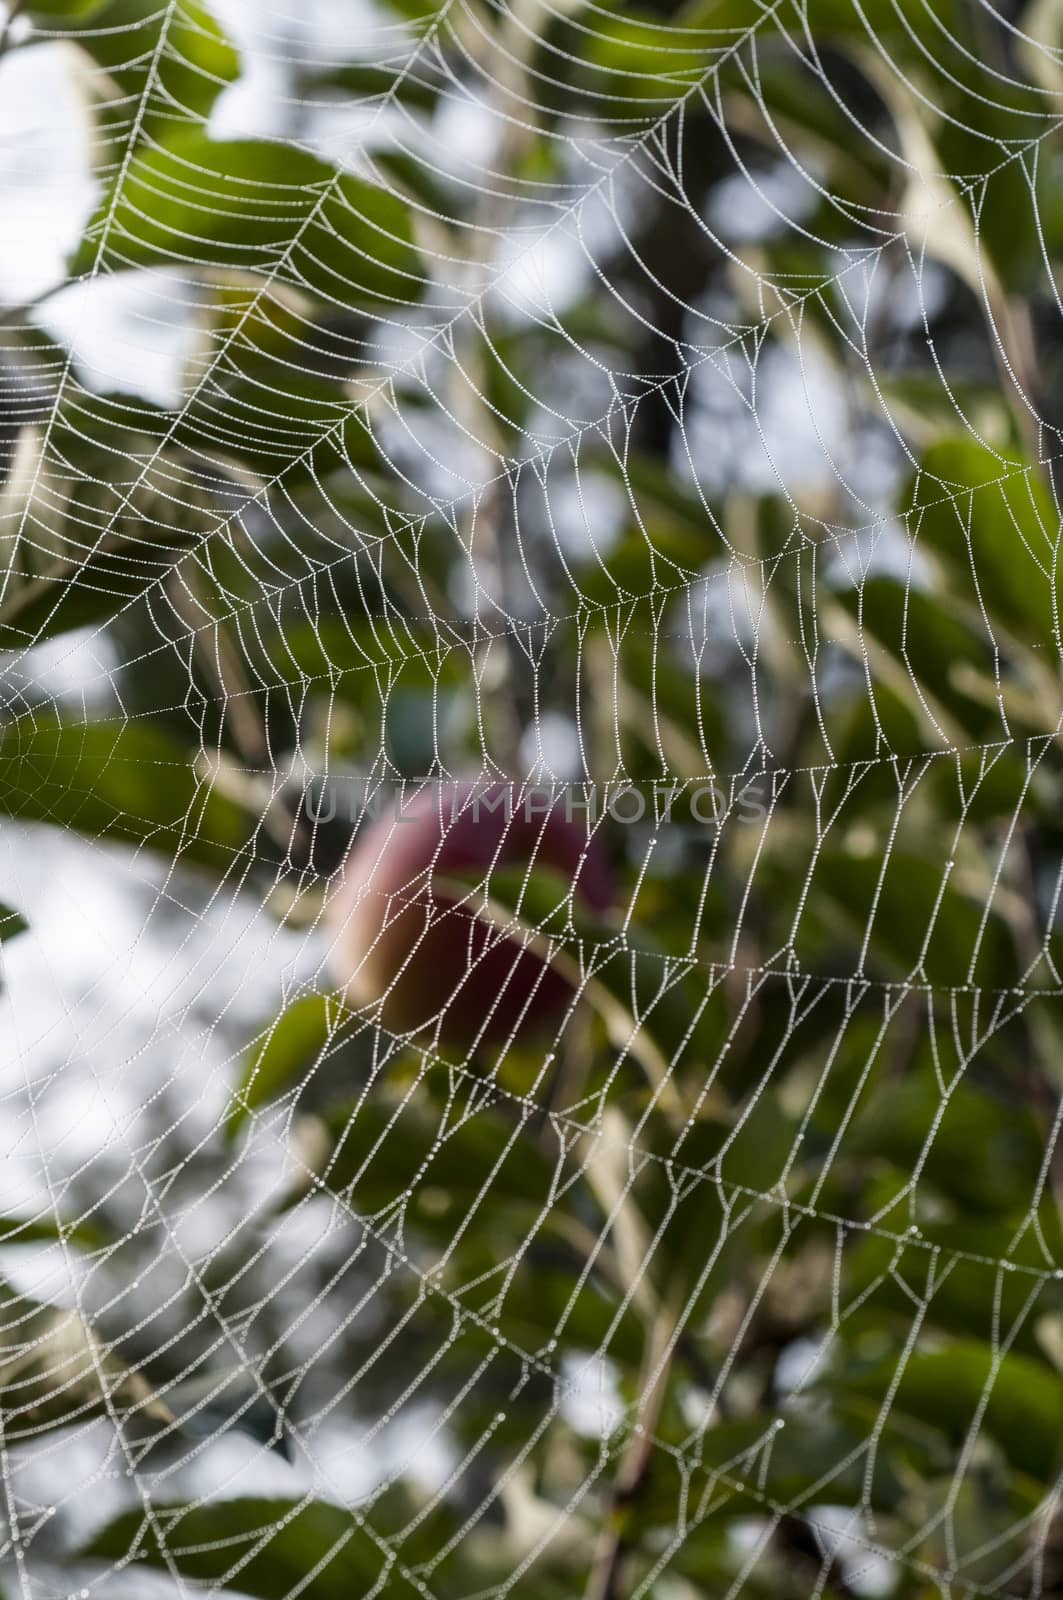 Spider's web hanging from trees with morning dew drops by Njean